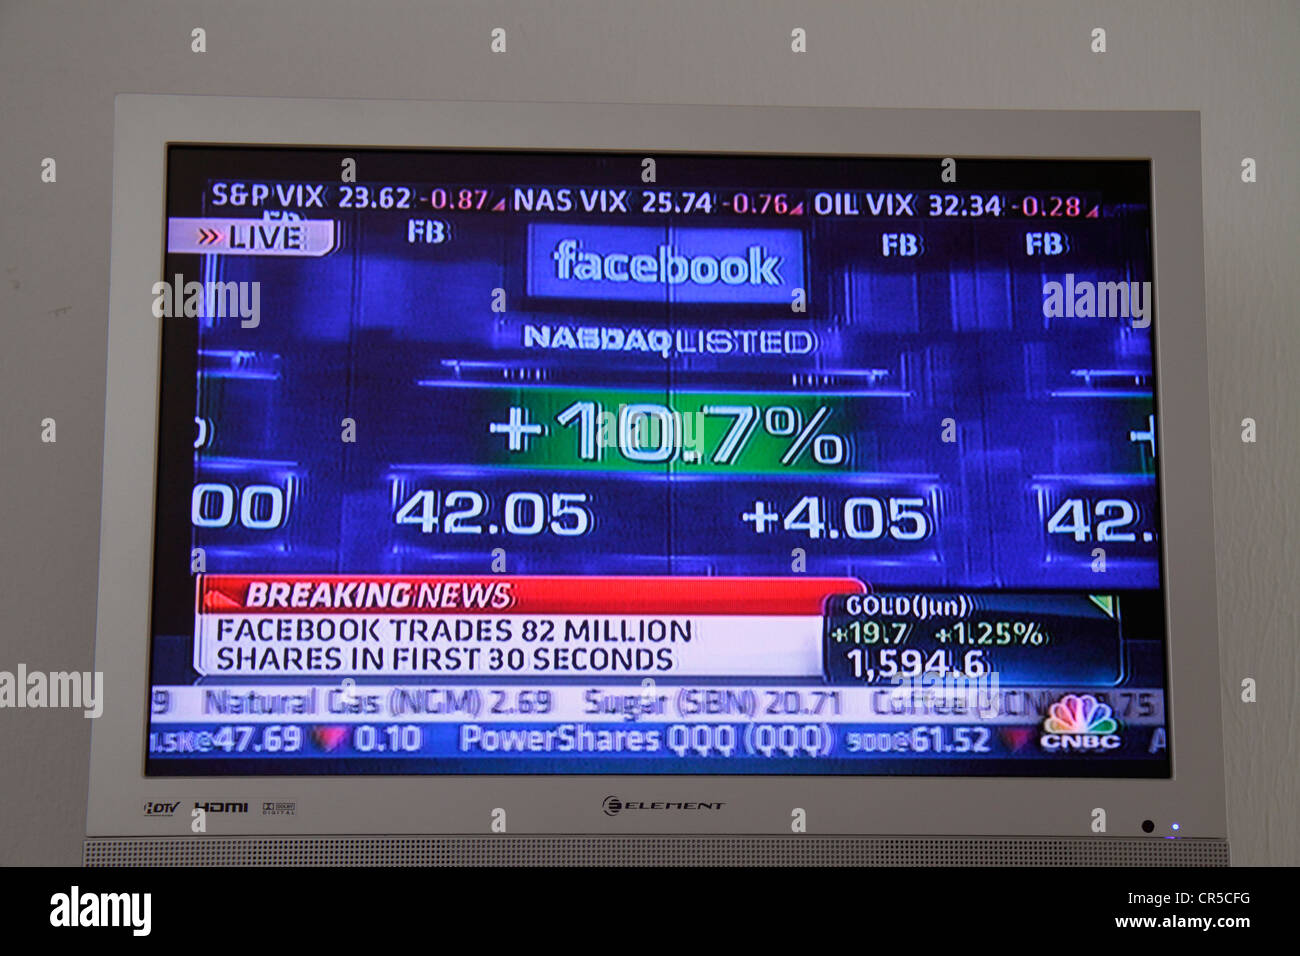 Florida,television,set,TV,cable,channel,HDTV,digital,monitor,CNBC,breaking news,Facebook,FB,IPO,initial public offering,stock market,opening trade,NAS Stock Photo